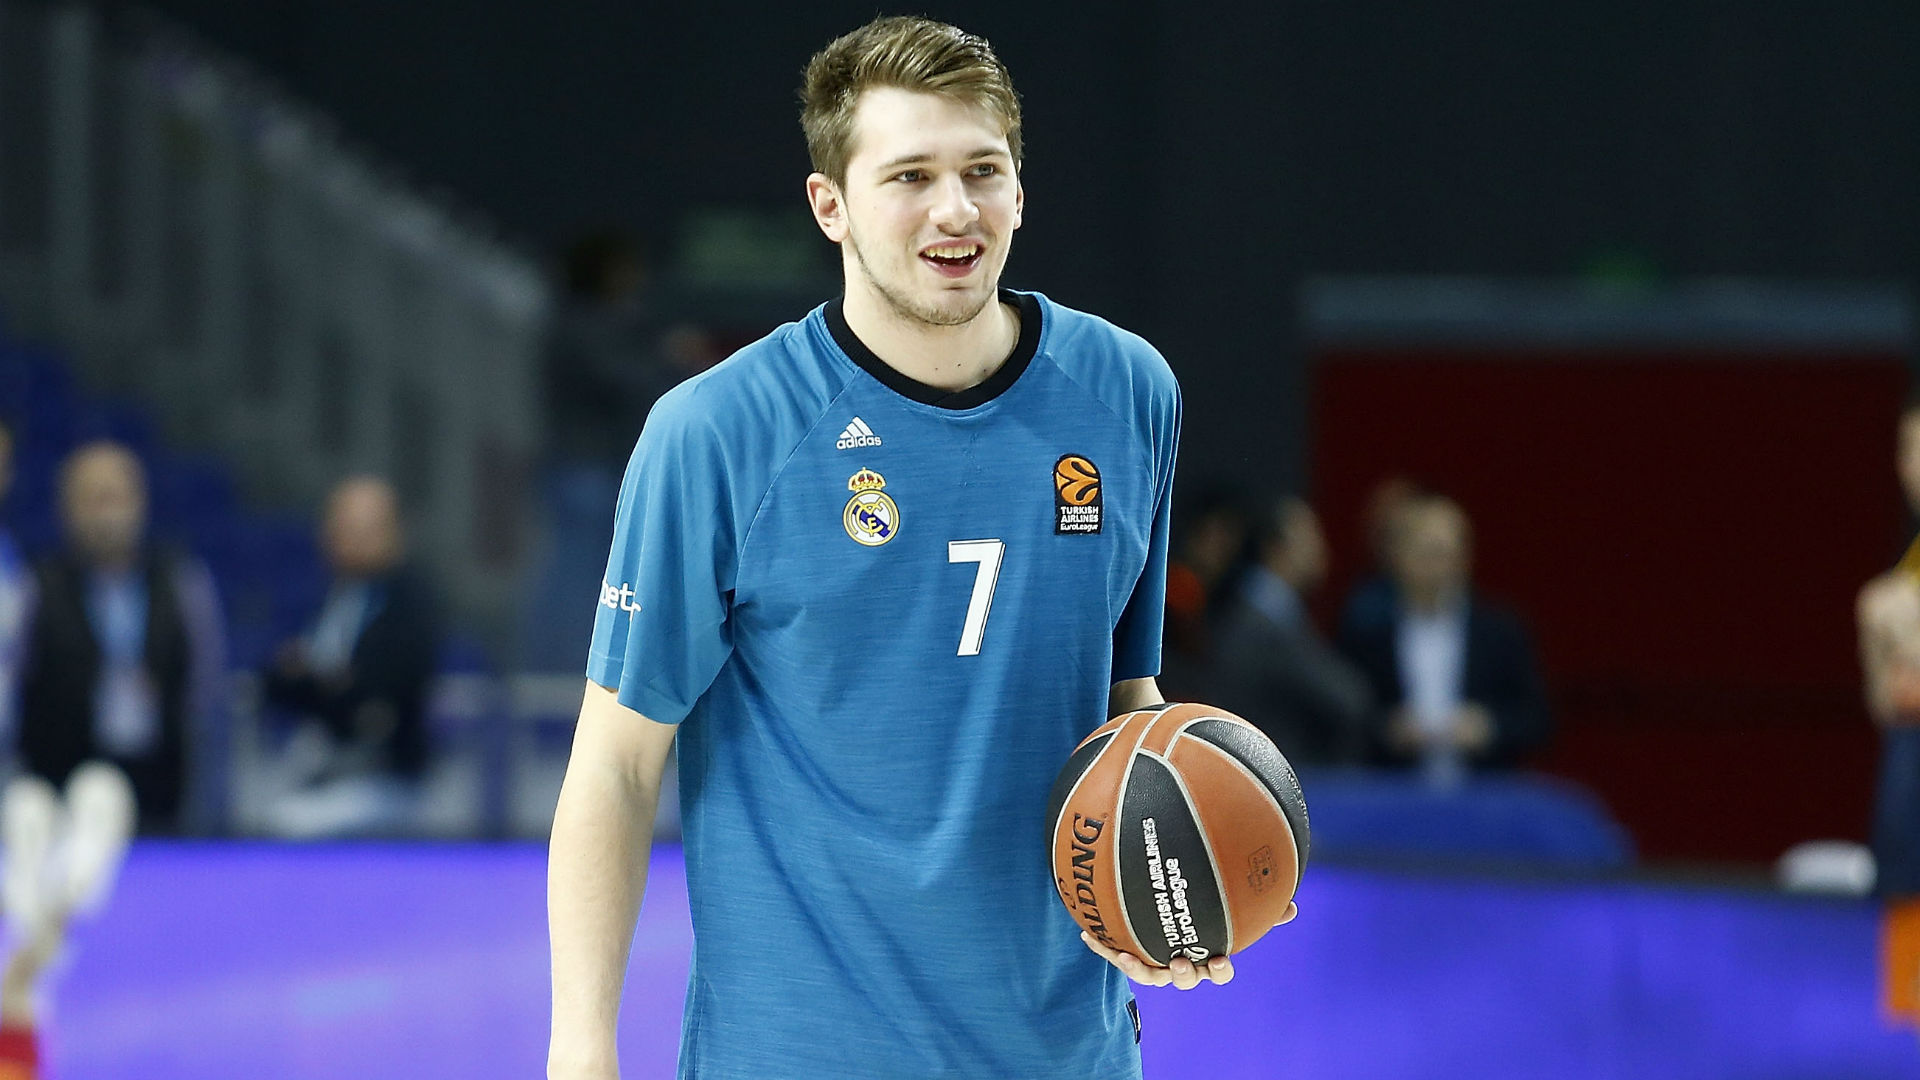 Luka Doncic's NBA decision won't come down to specific team, agent says | NBA.com ...1920 x 1080